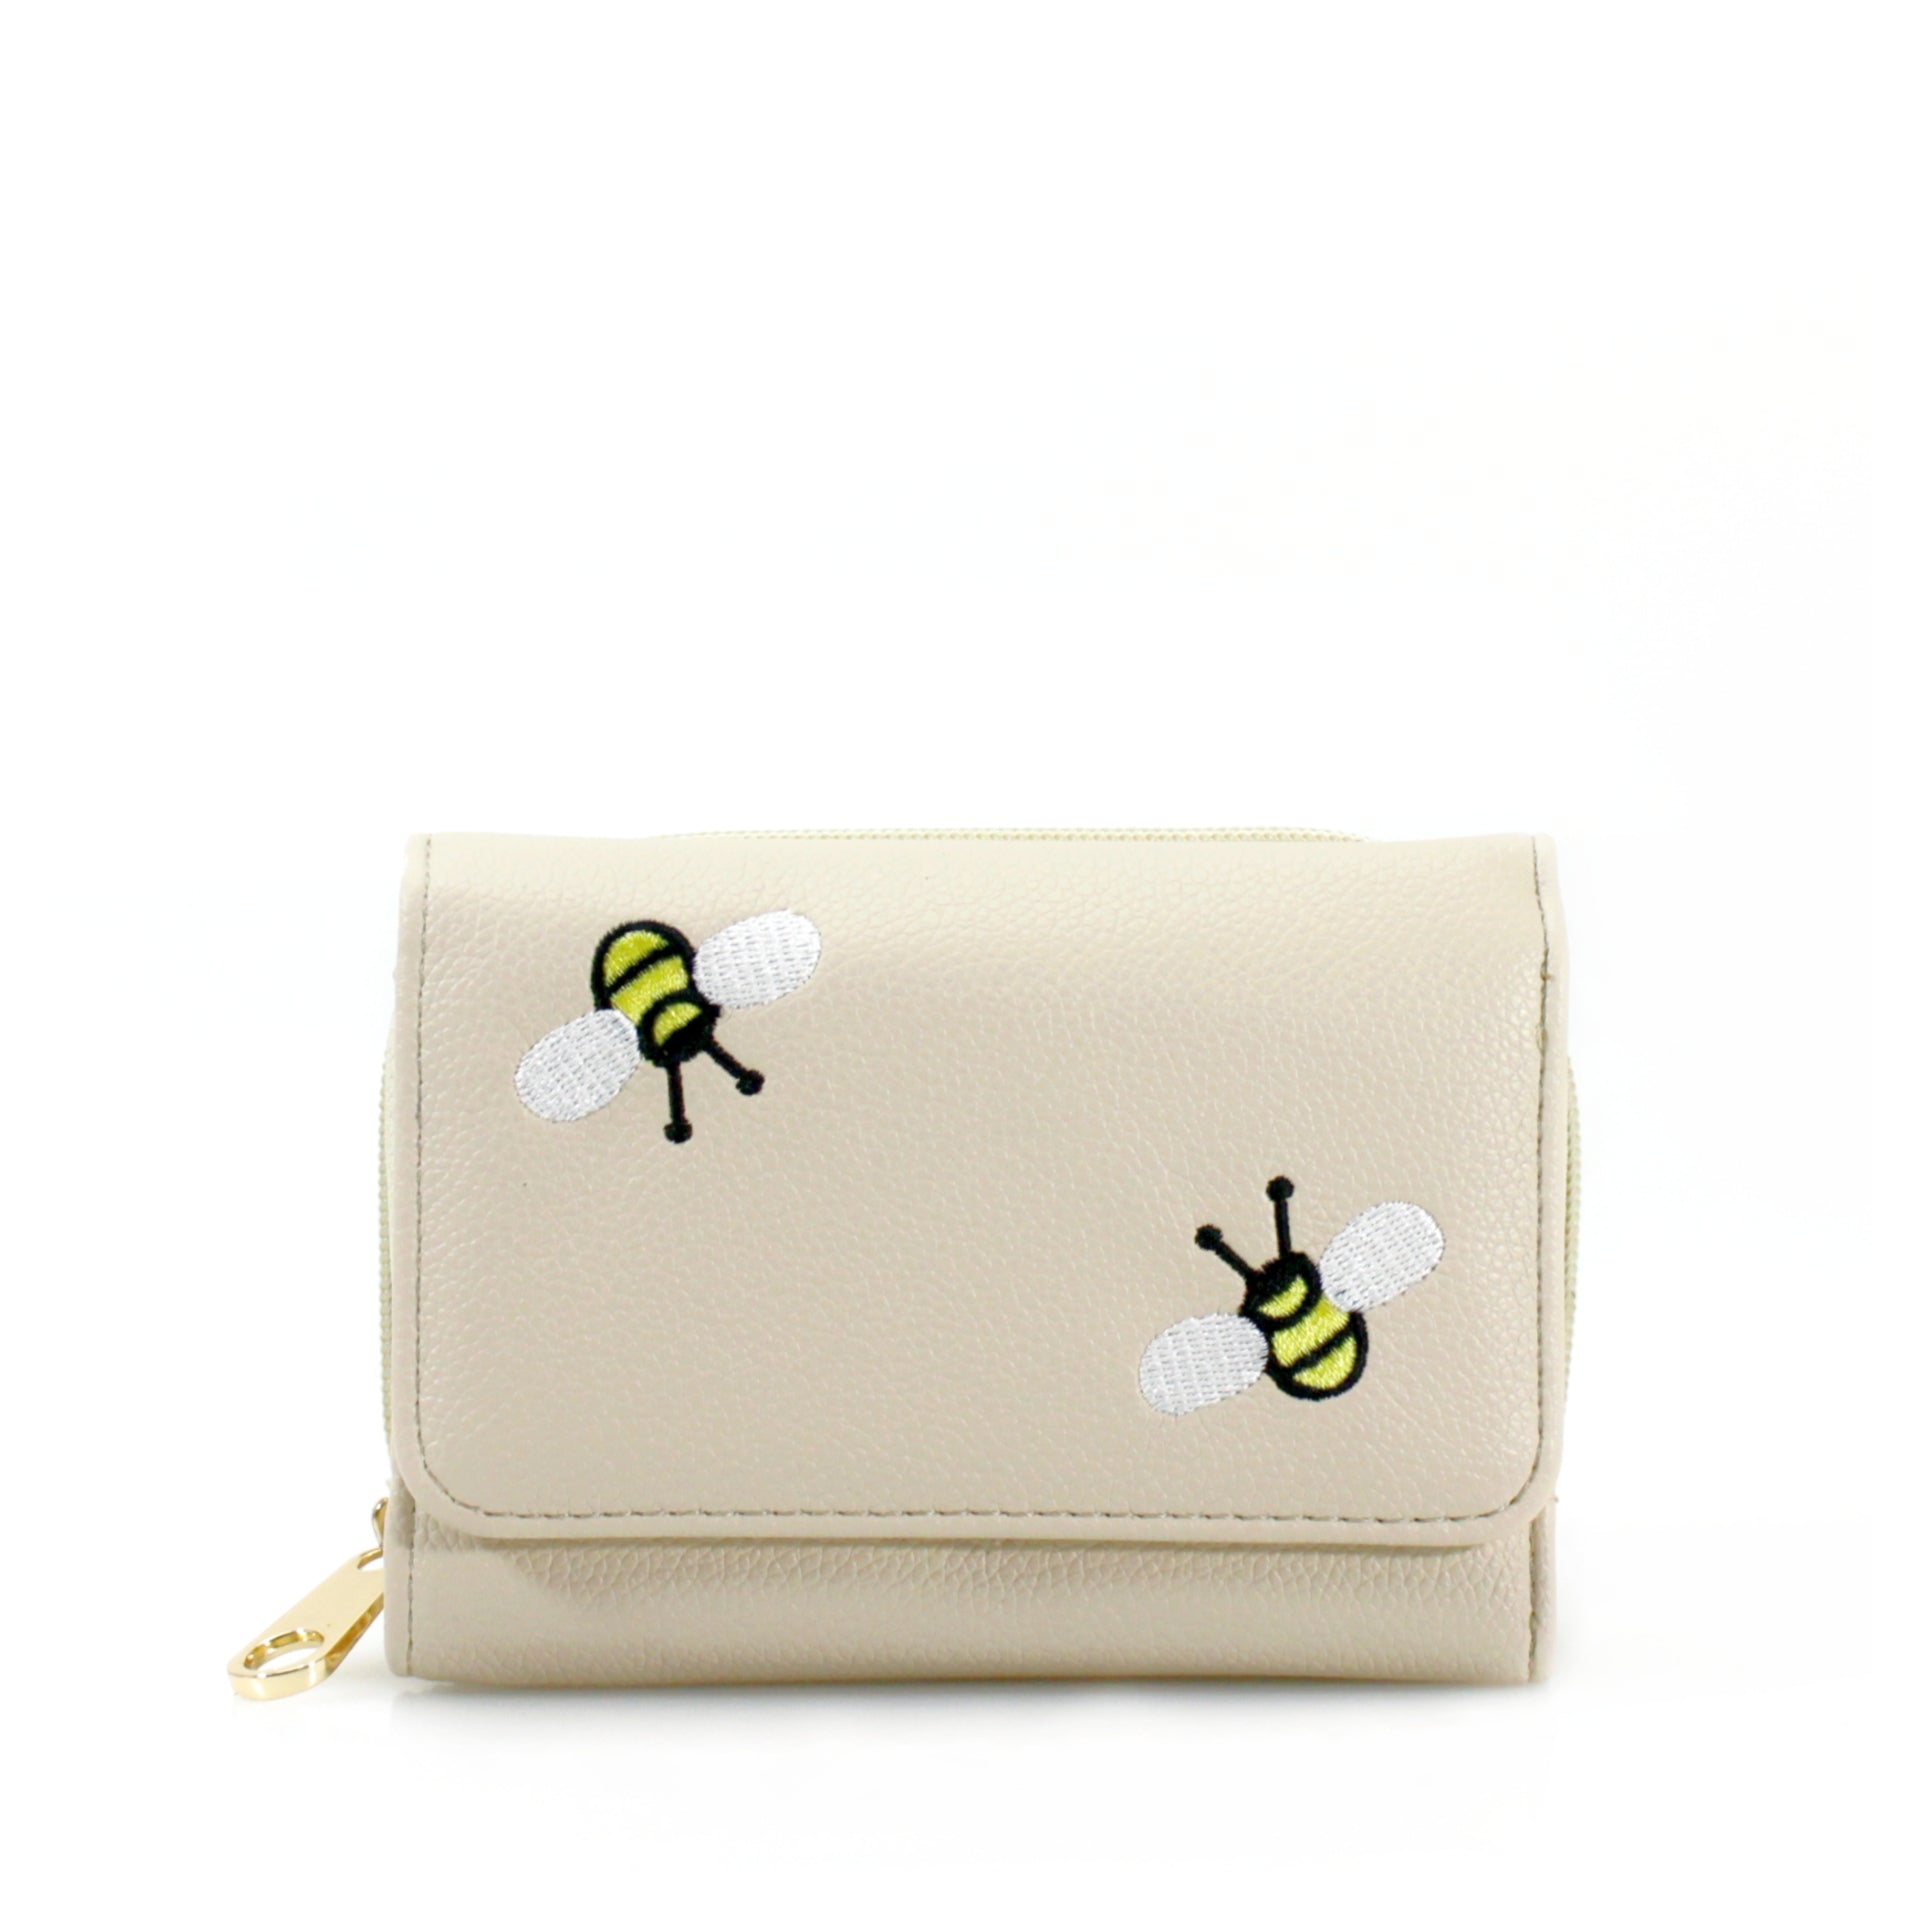 Danielle Embroidered Bees Purse - LB Clothing